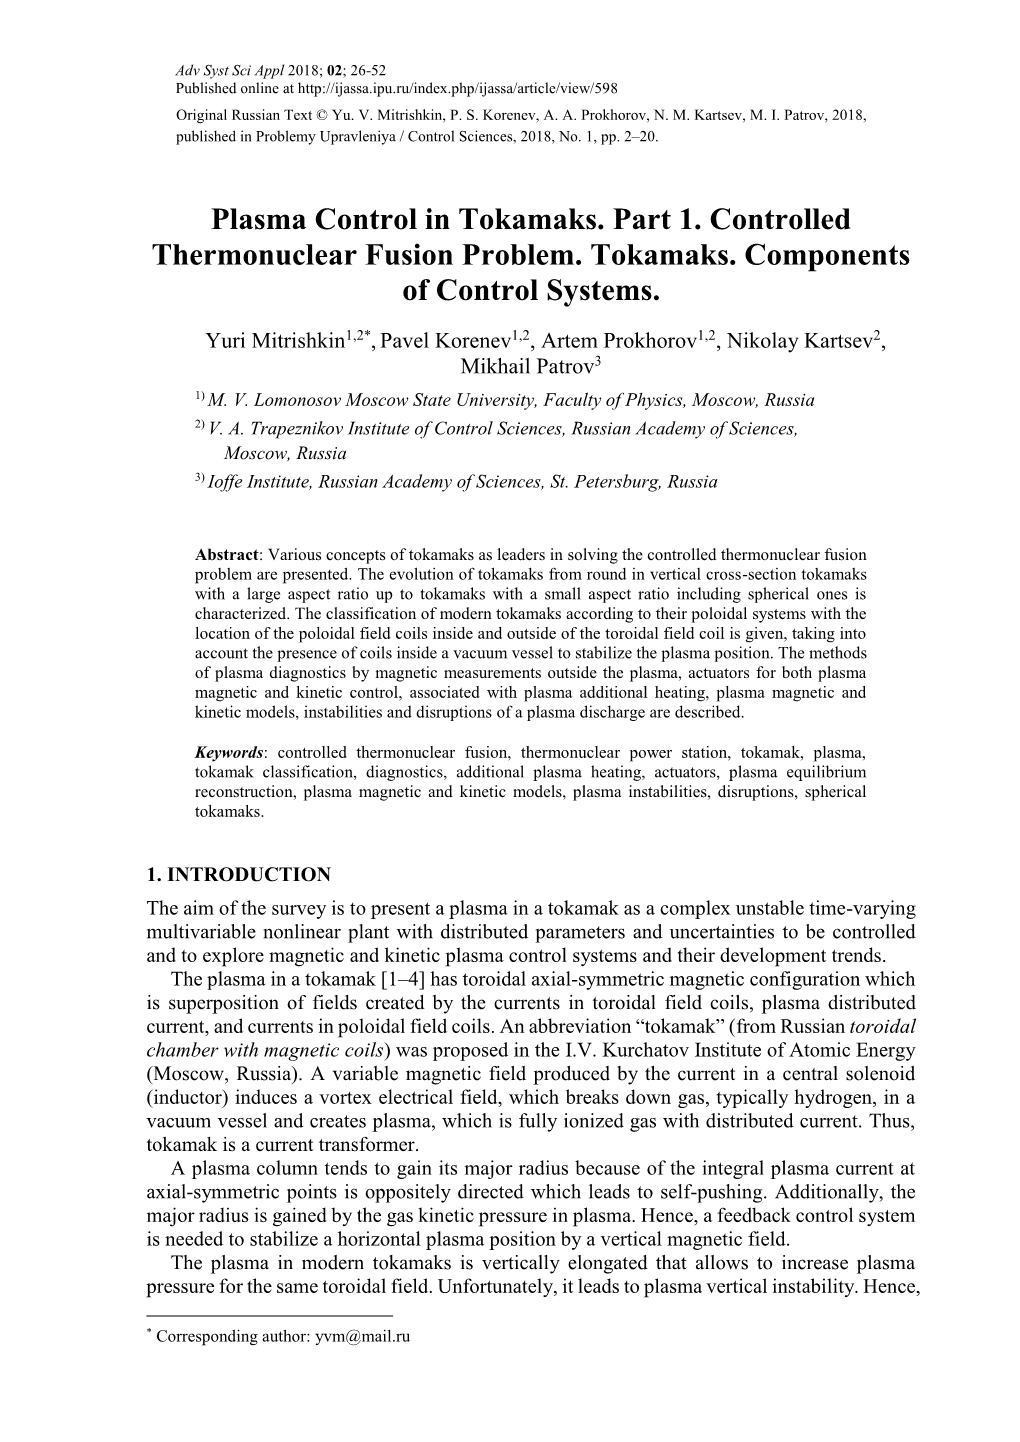 Plasma Control in Tokamaks. Part 1. Controlled Thermonuclear Fusion Problem